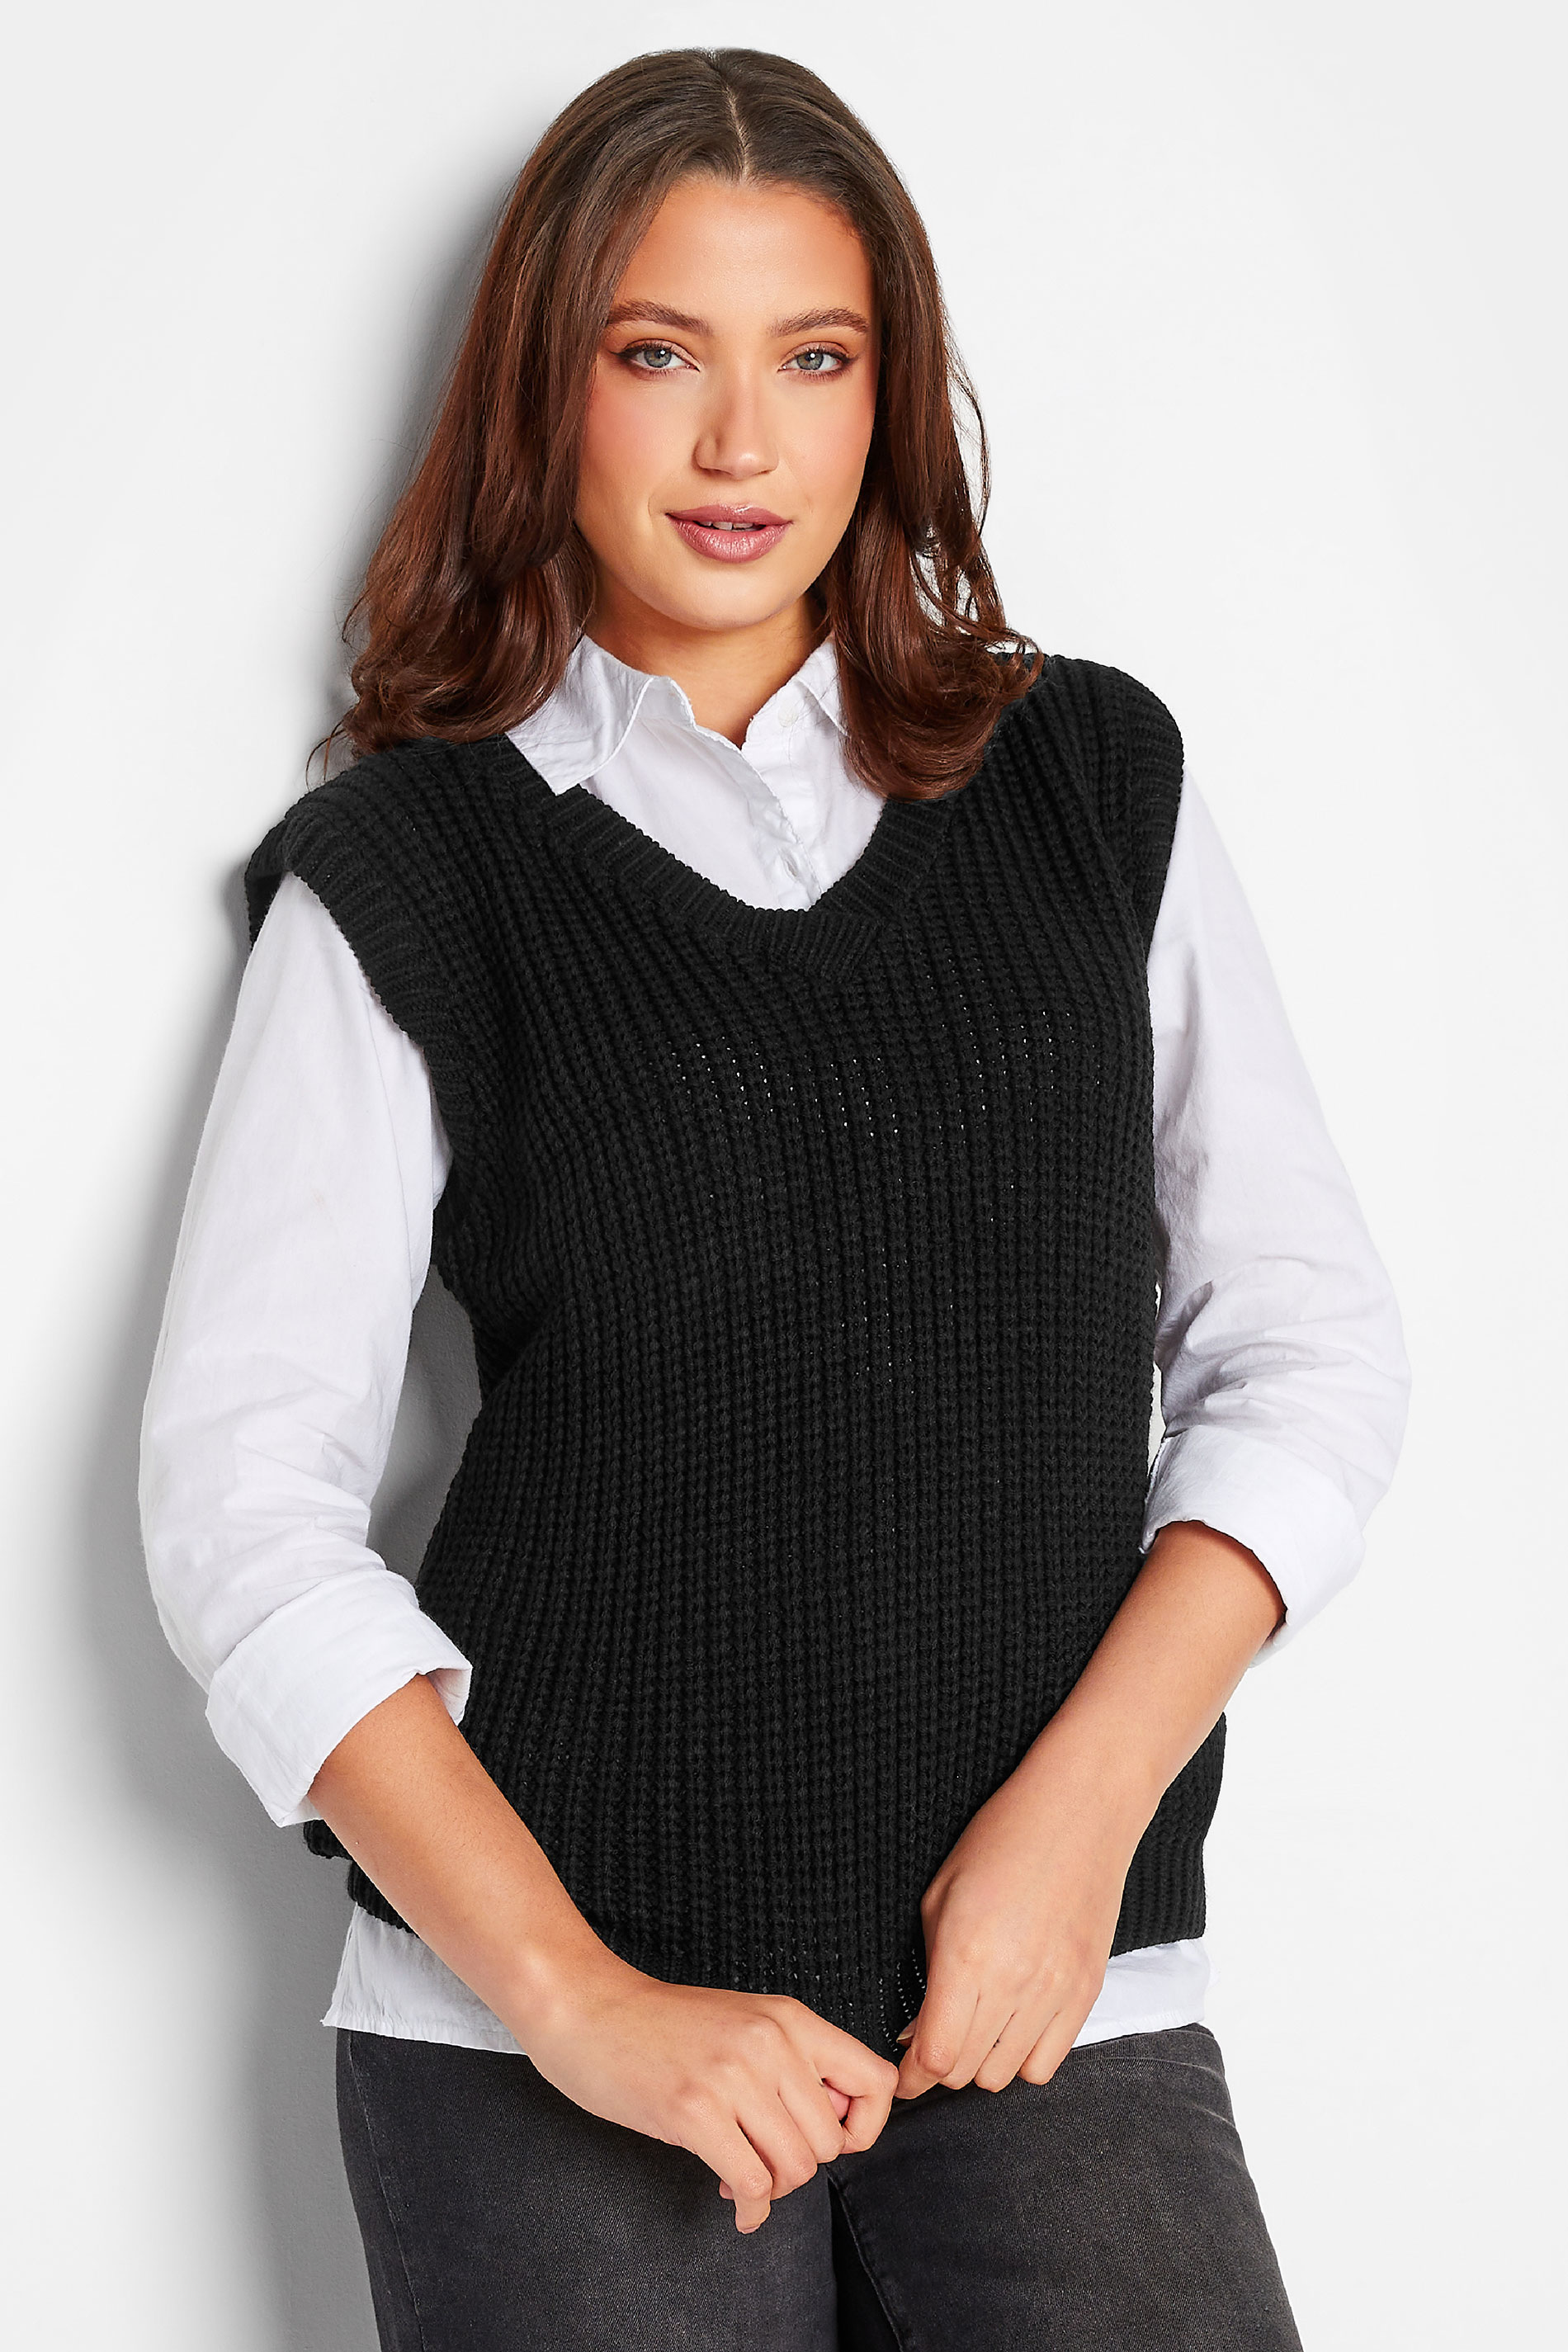 LTS Tall Women's Black Knitted Vest Top  | Long Tall Sally  1